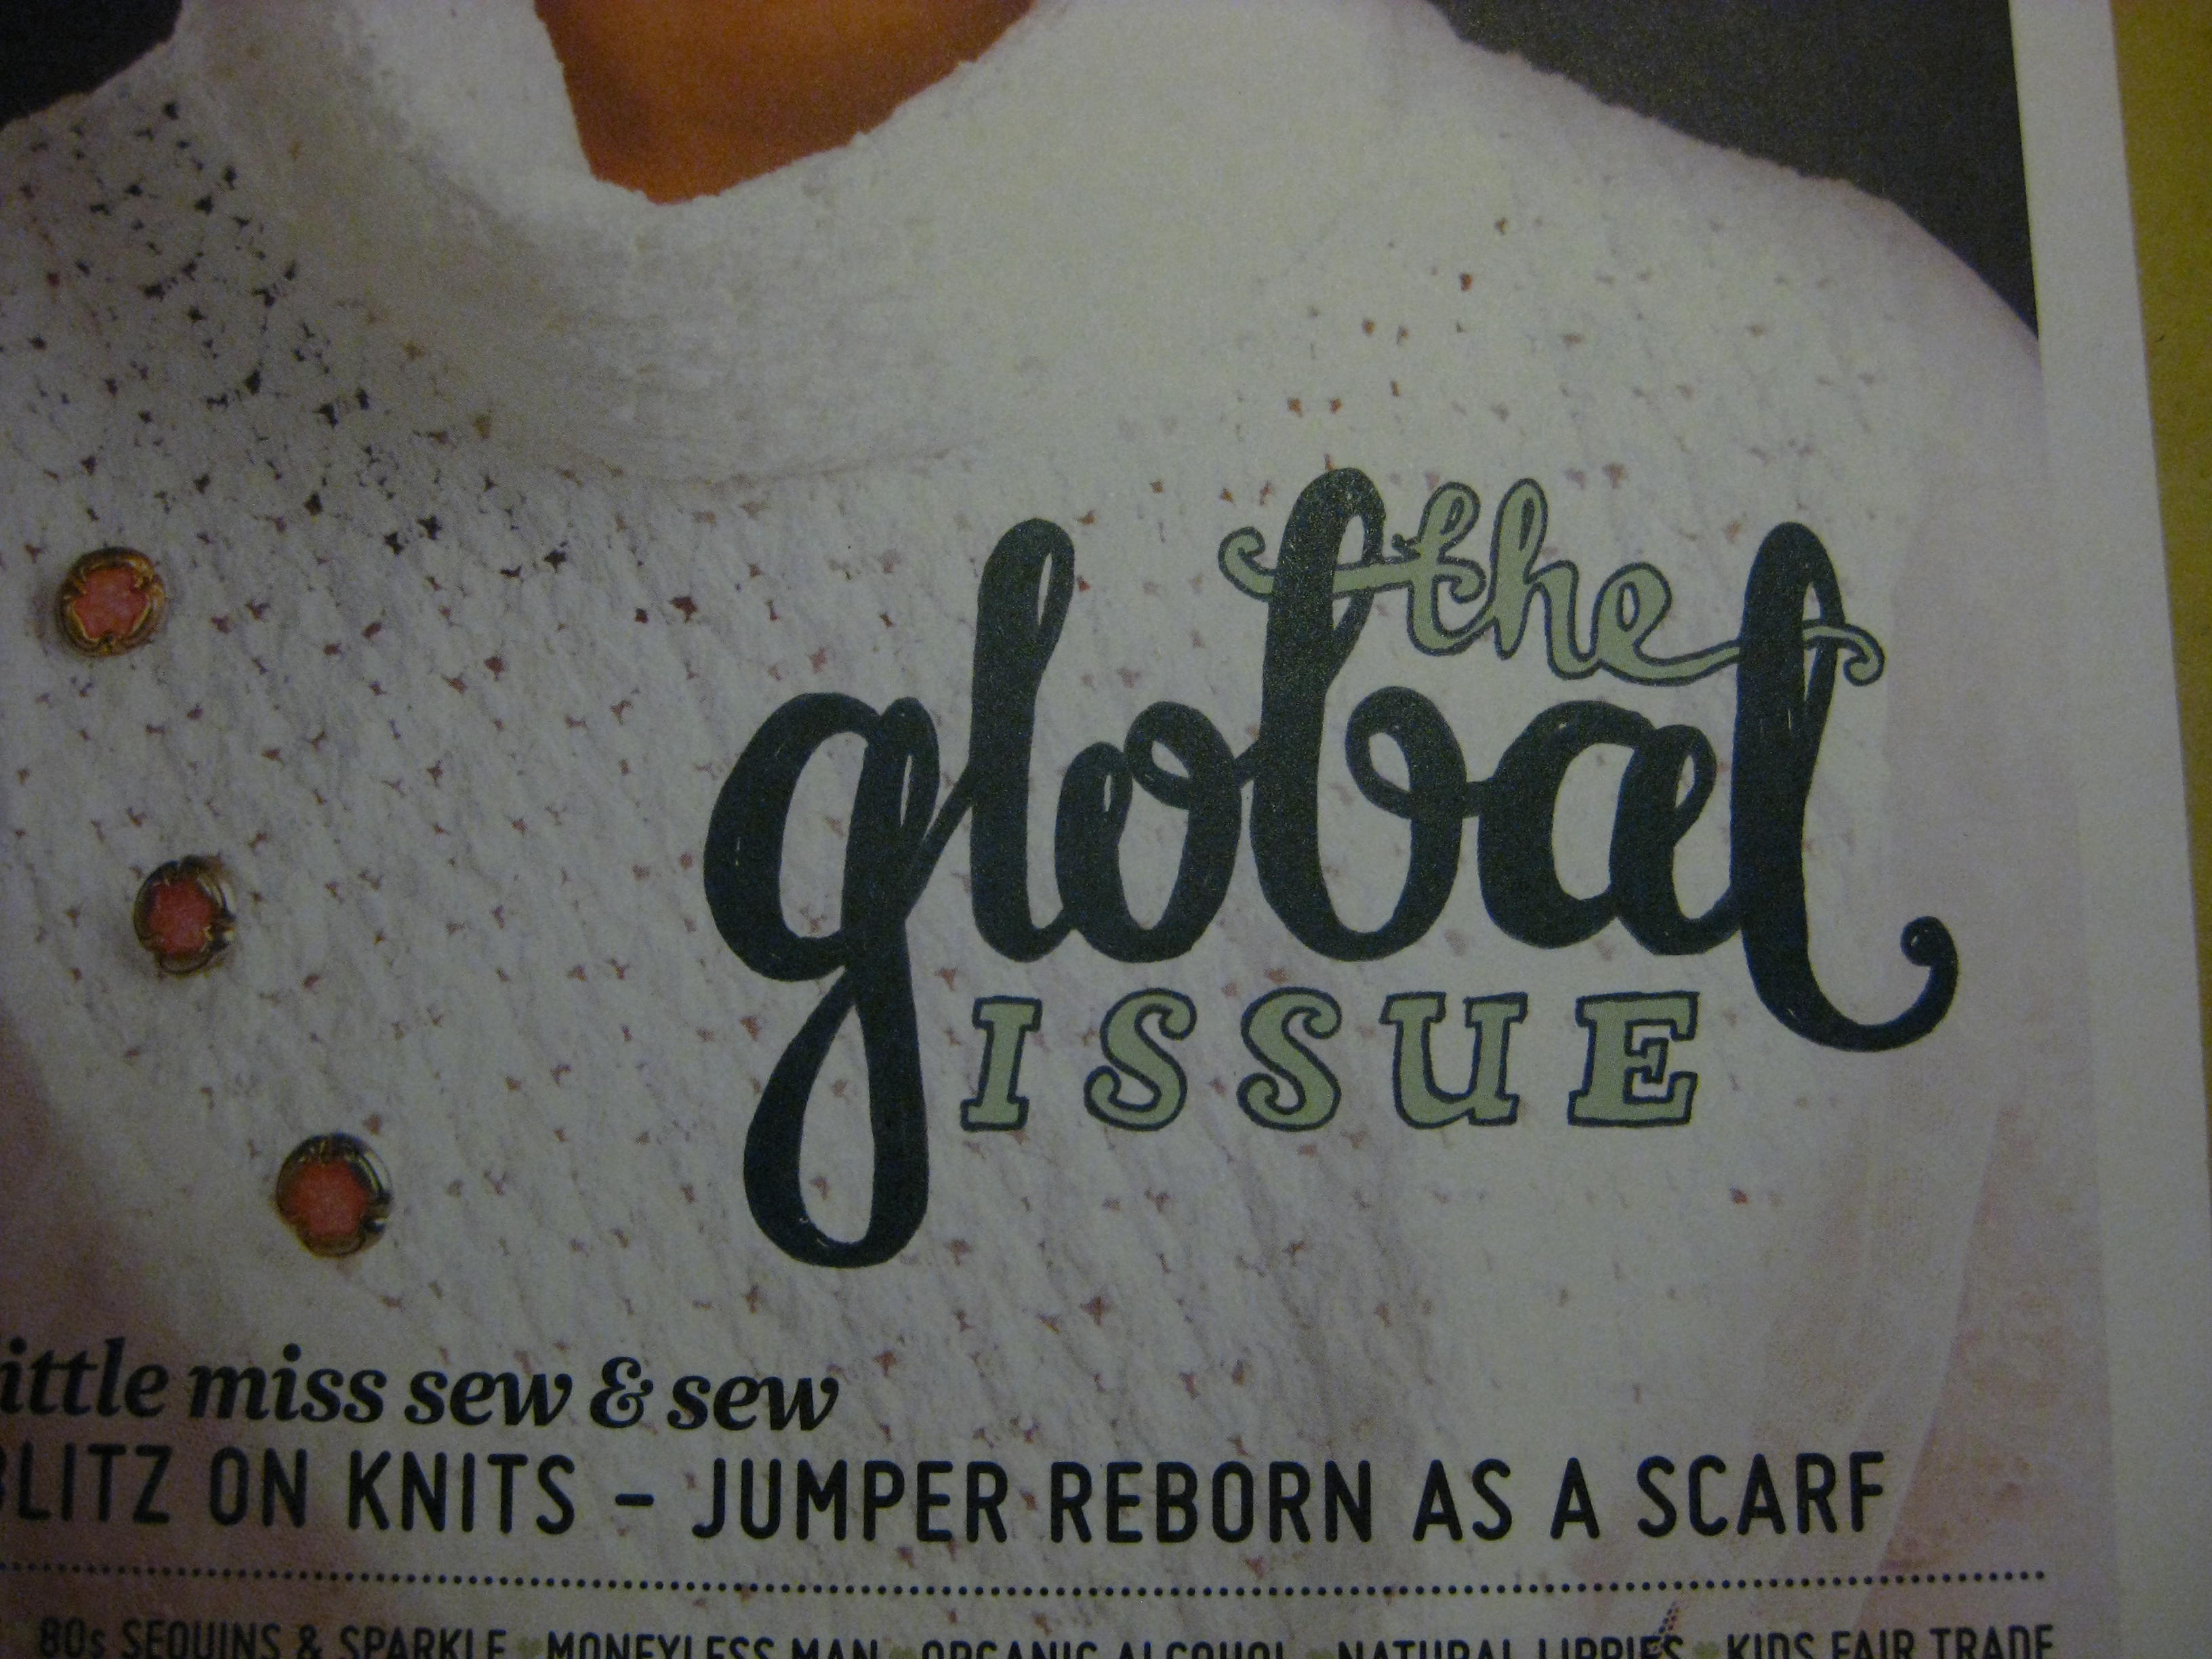 Detailed shot of my lettering saying "the global issue" on the front of Peppermint.